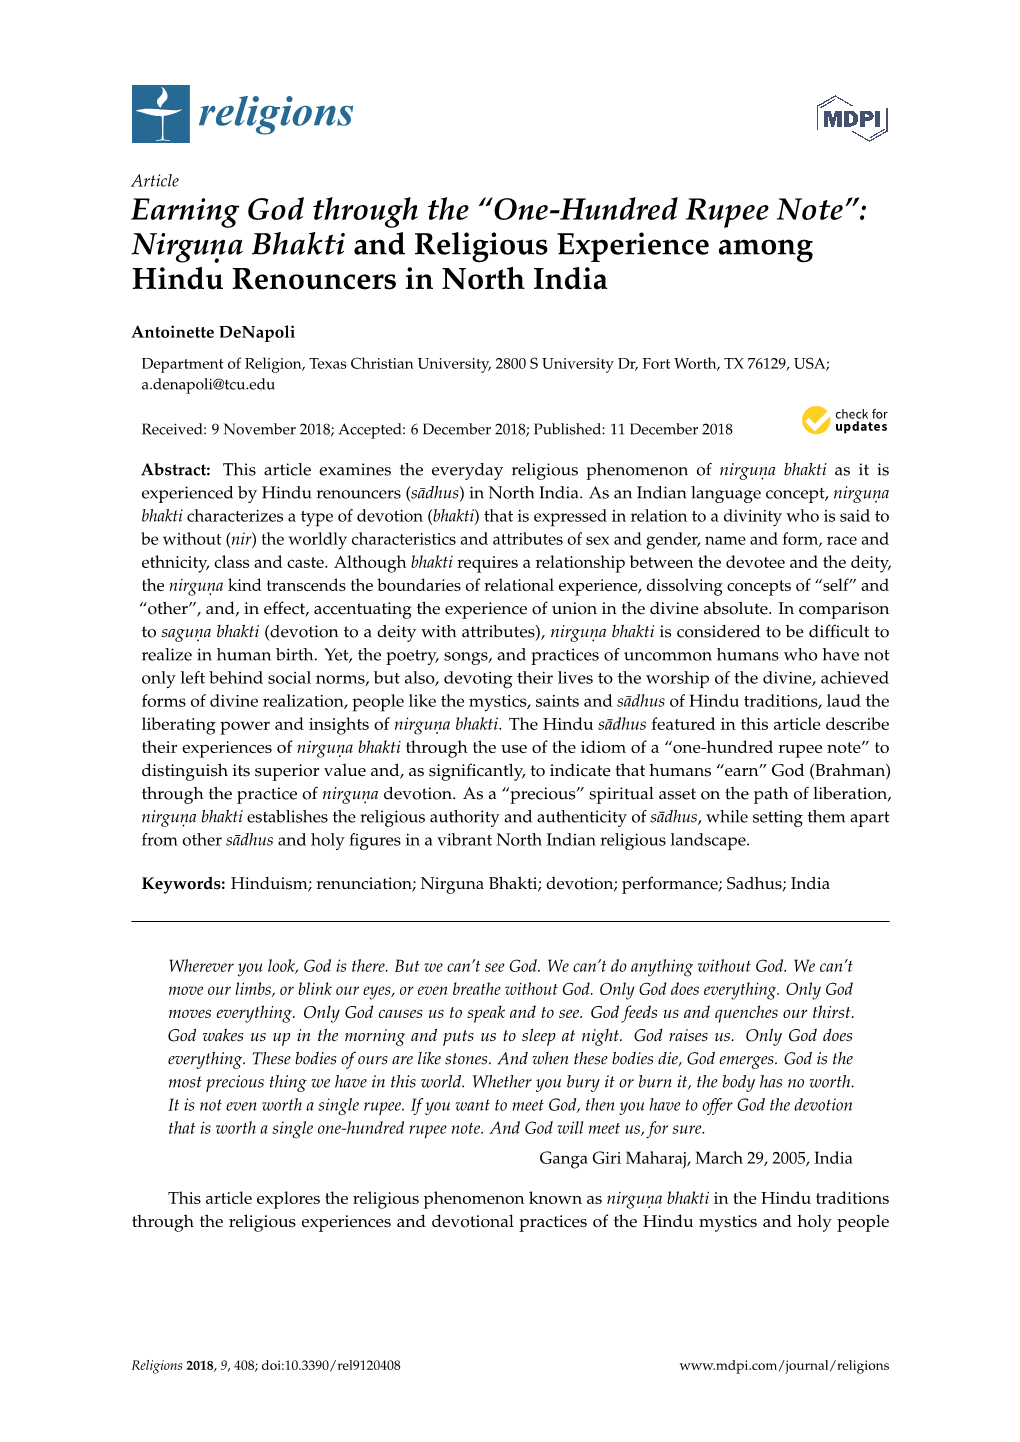 Nirguṇa Bhakti and Religious Experience Among Hindu Renouncers in North